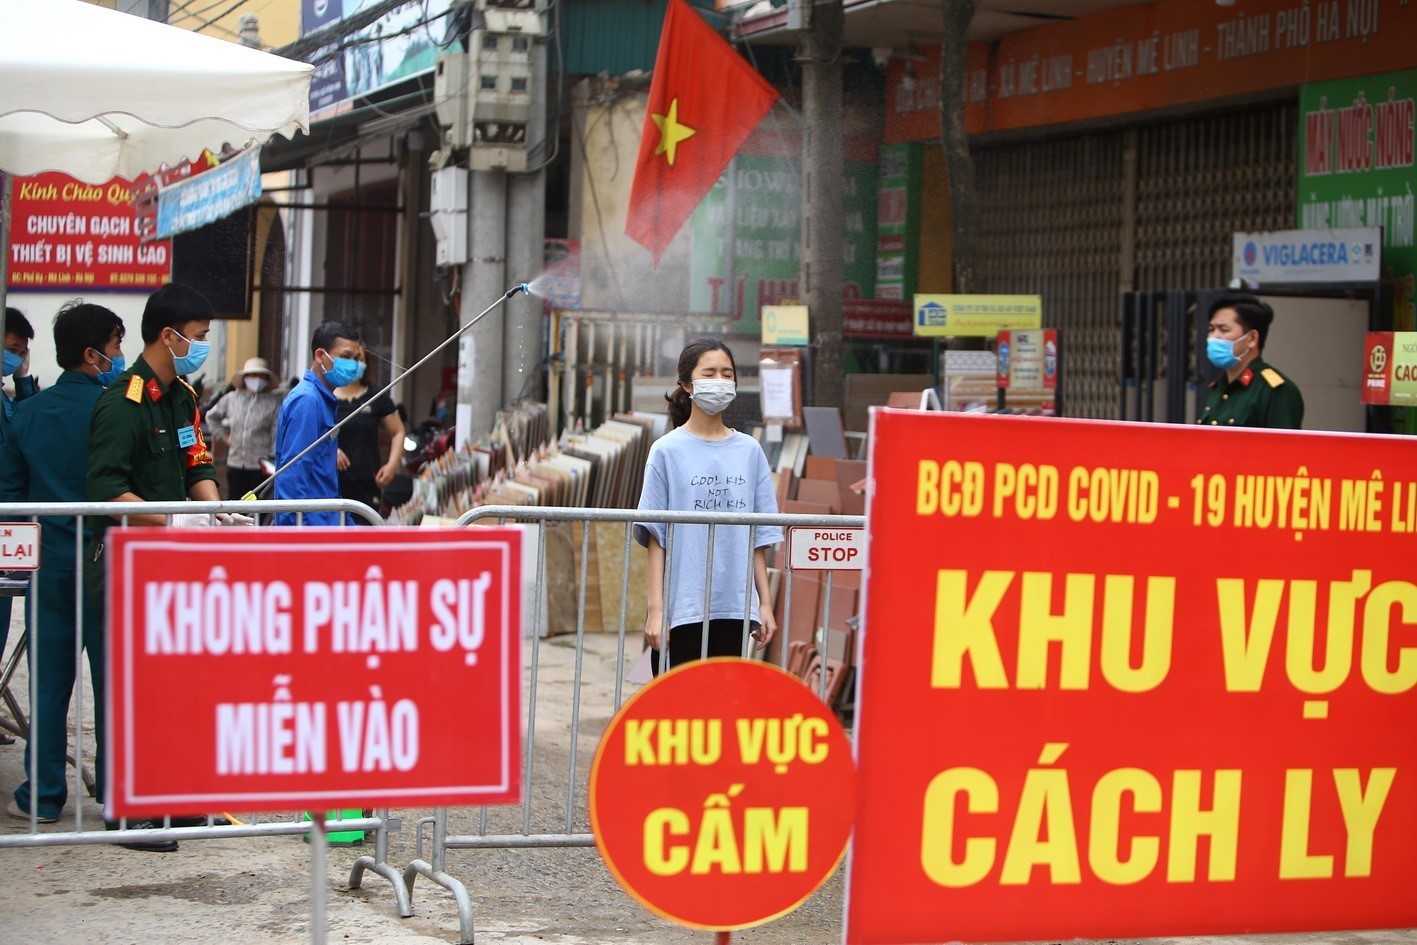 An officer sprays disinfectant on a shipper of essential goods in the sealed-off zone in Ha Loi hamlet of Hanoi’s Me Linh district (Photo: VNA)